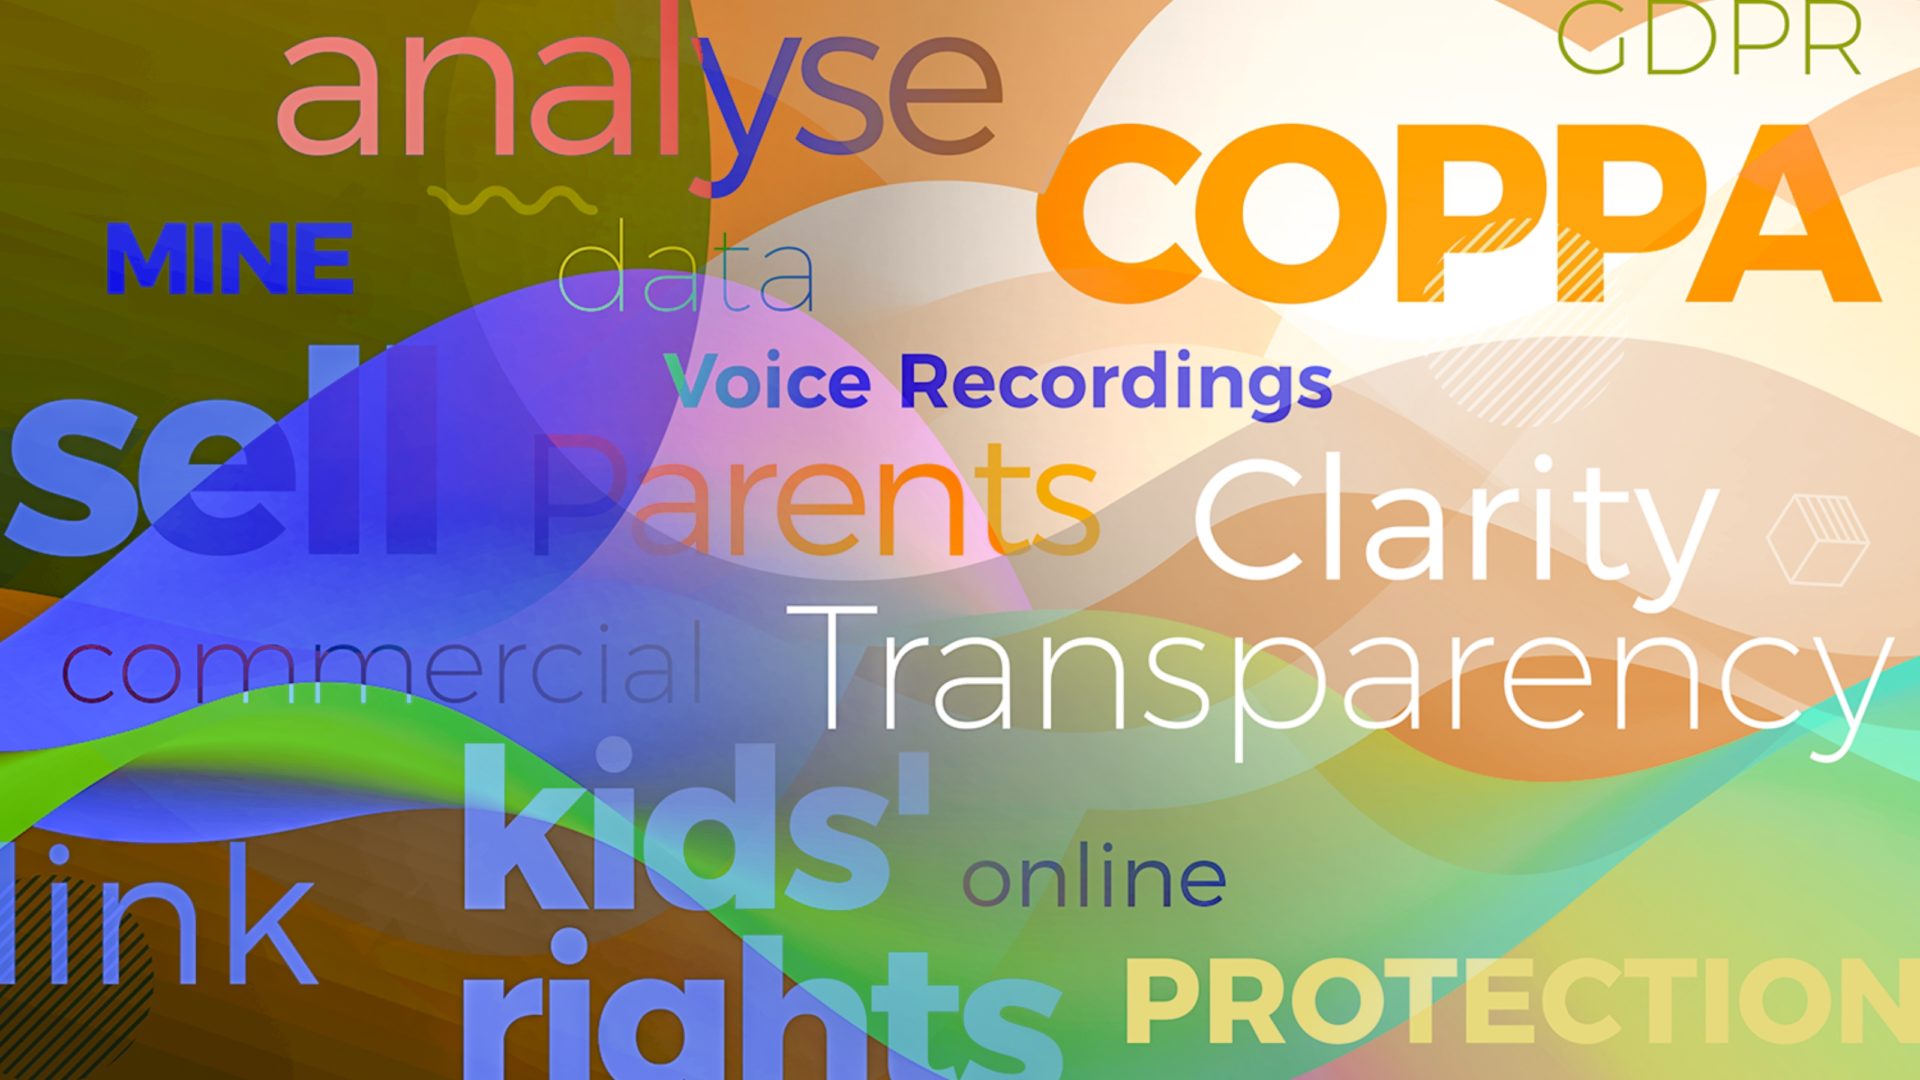 A word cloud image on privacy. Some of the words included are "COPPA", "kids' rights", "online protection", and "voice recordings."